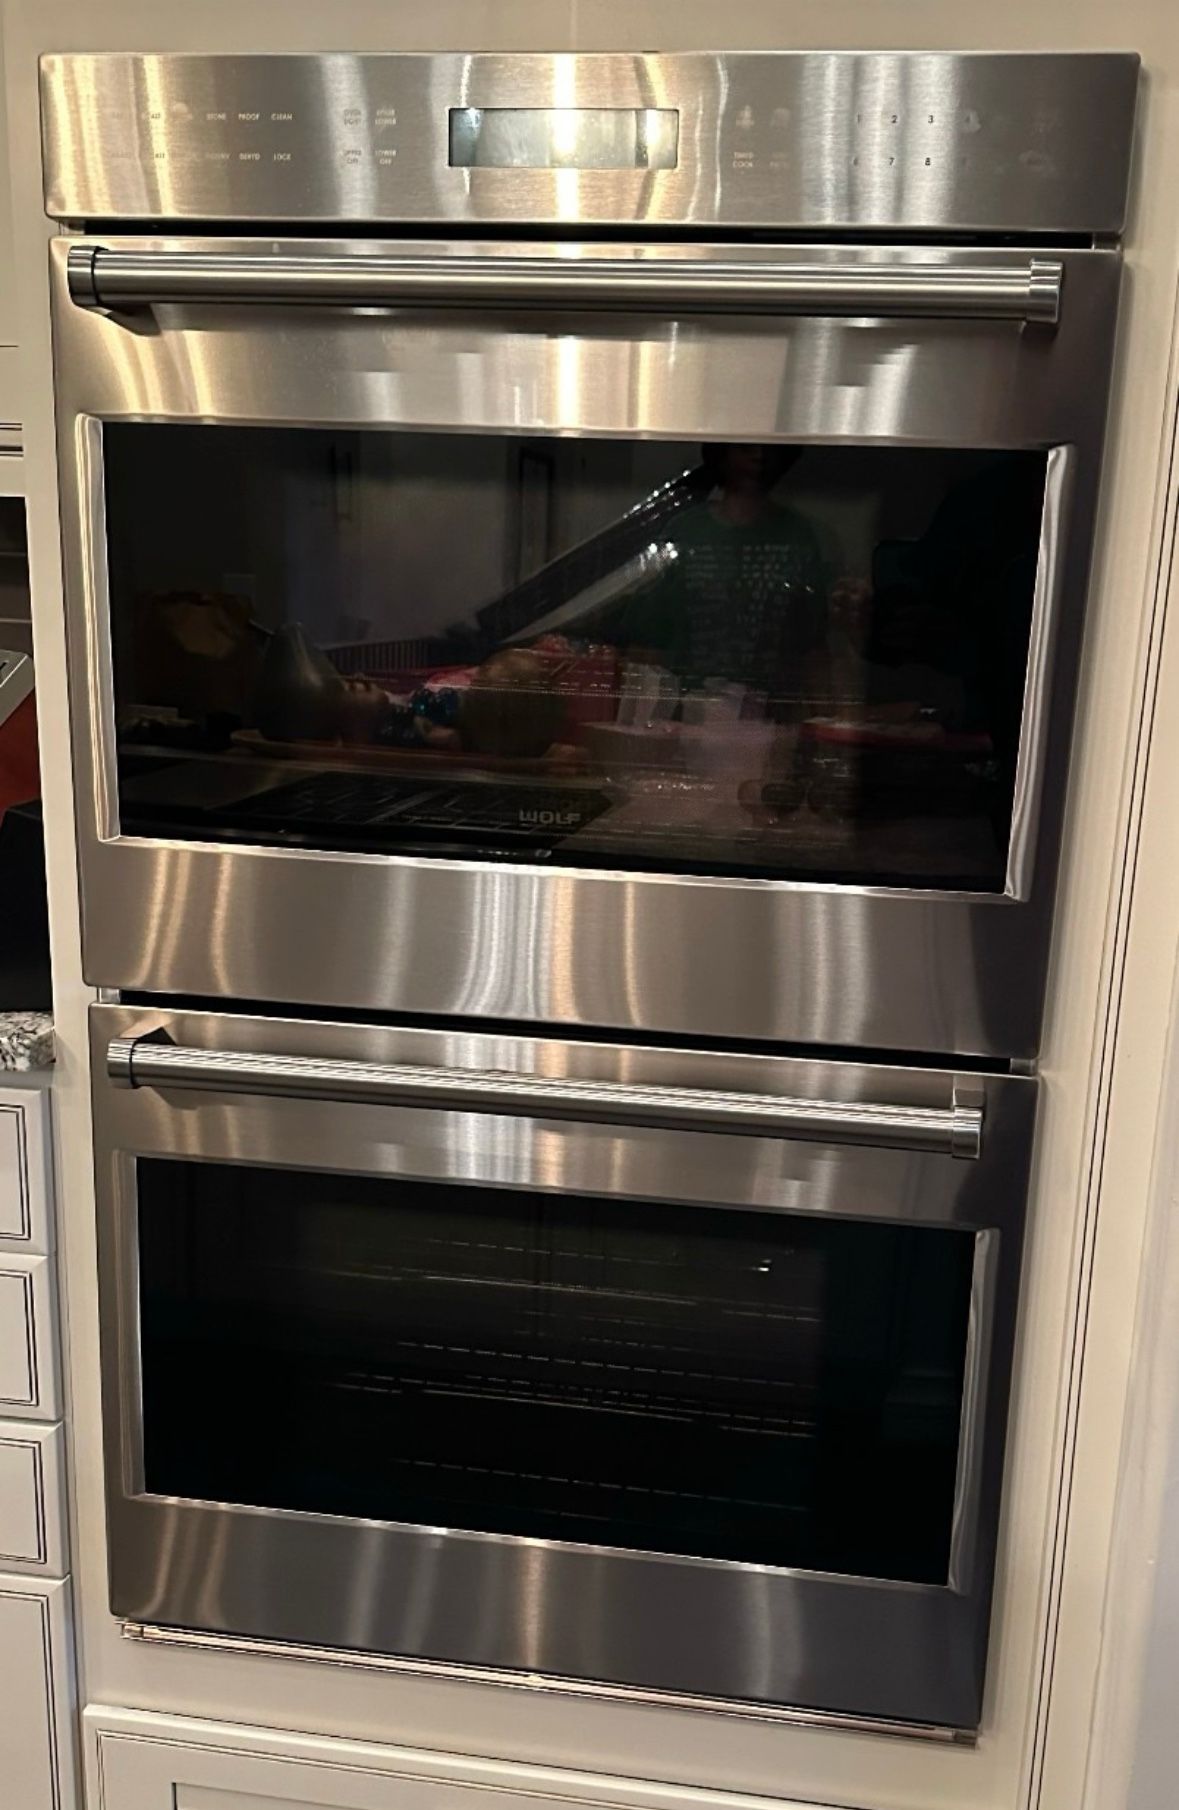 Wolf 30" E Series Transitional Built-In Double Oven